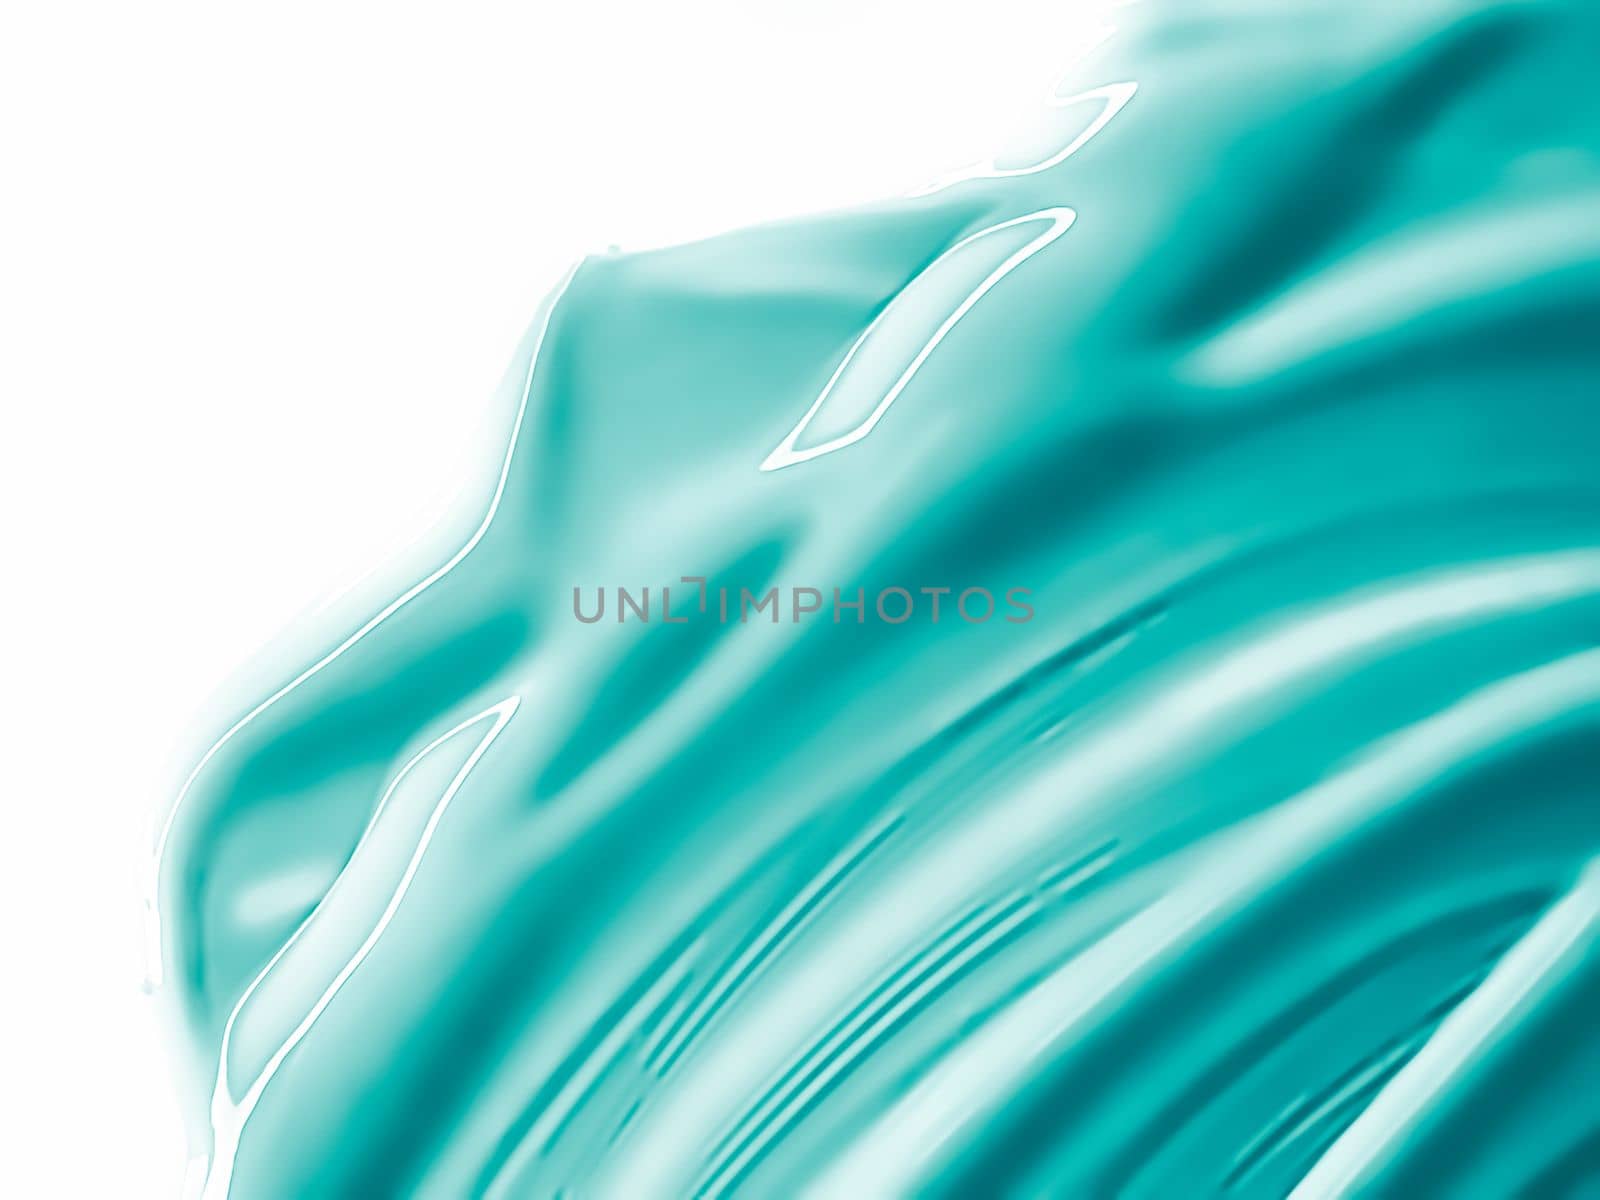 Glossy green cosmetic texture as beauty make-up product background, cosmetics and luxury makeup brand design by Anneleven